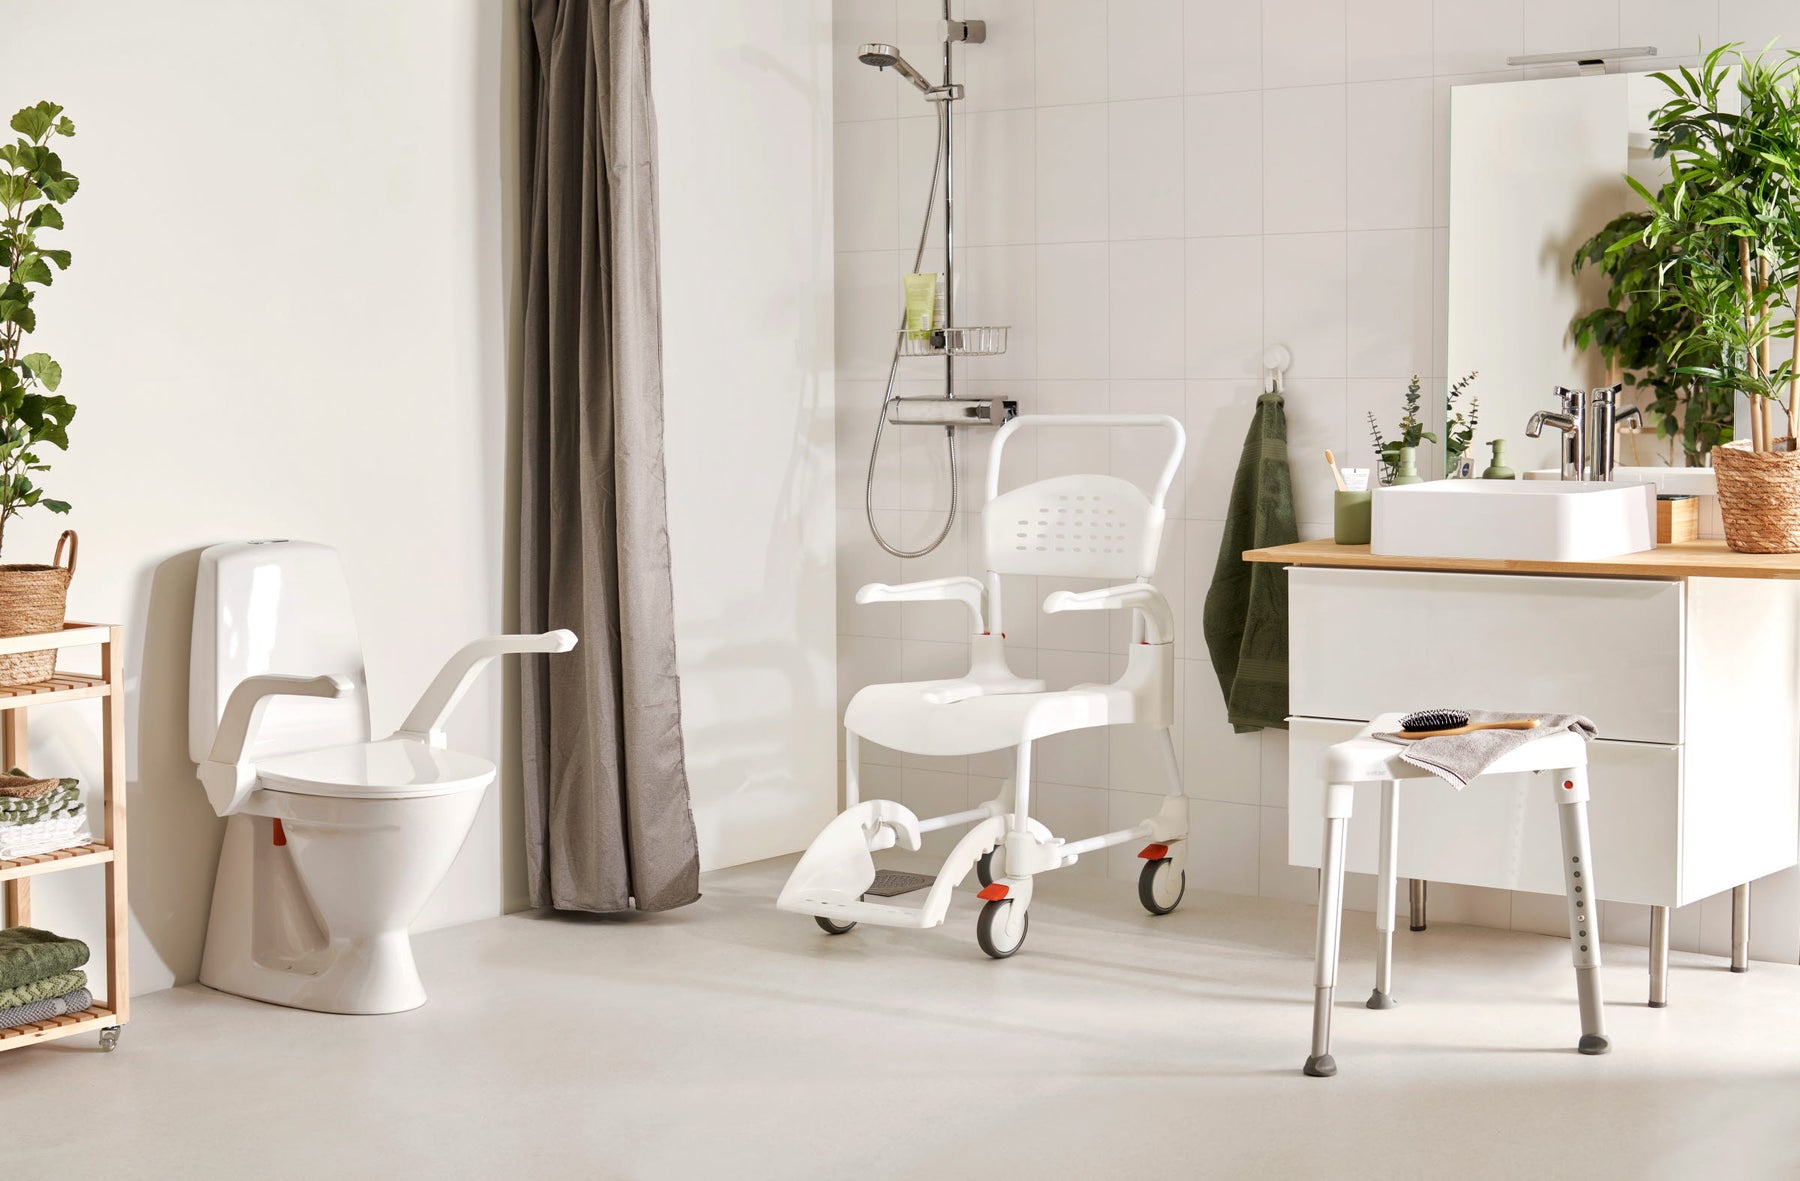 Introducing the Award-Winning Sweden Etac Clean - The Ultimate Mobile Shower Commode